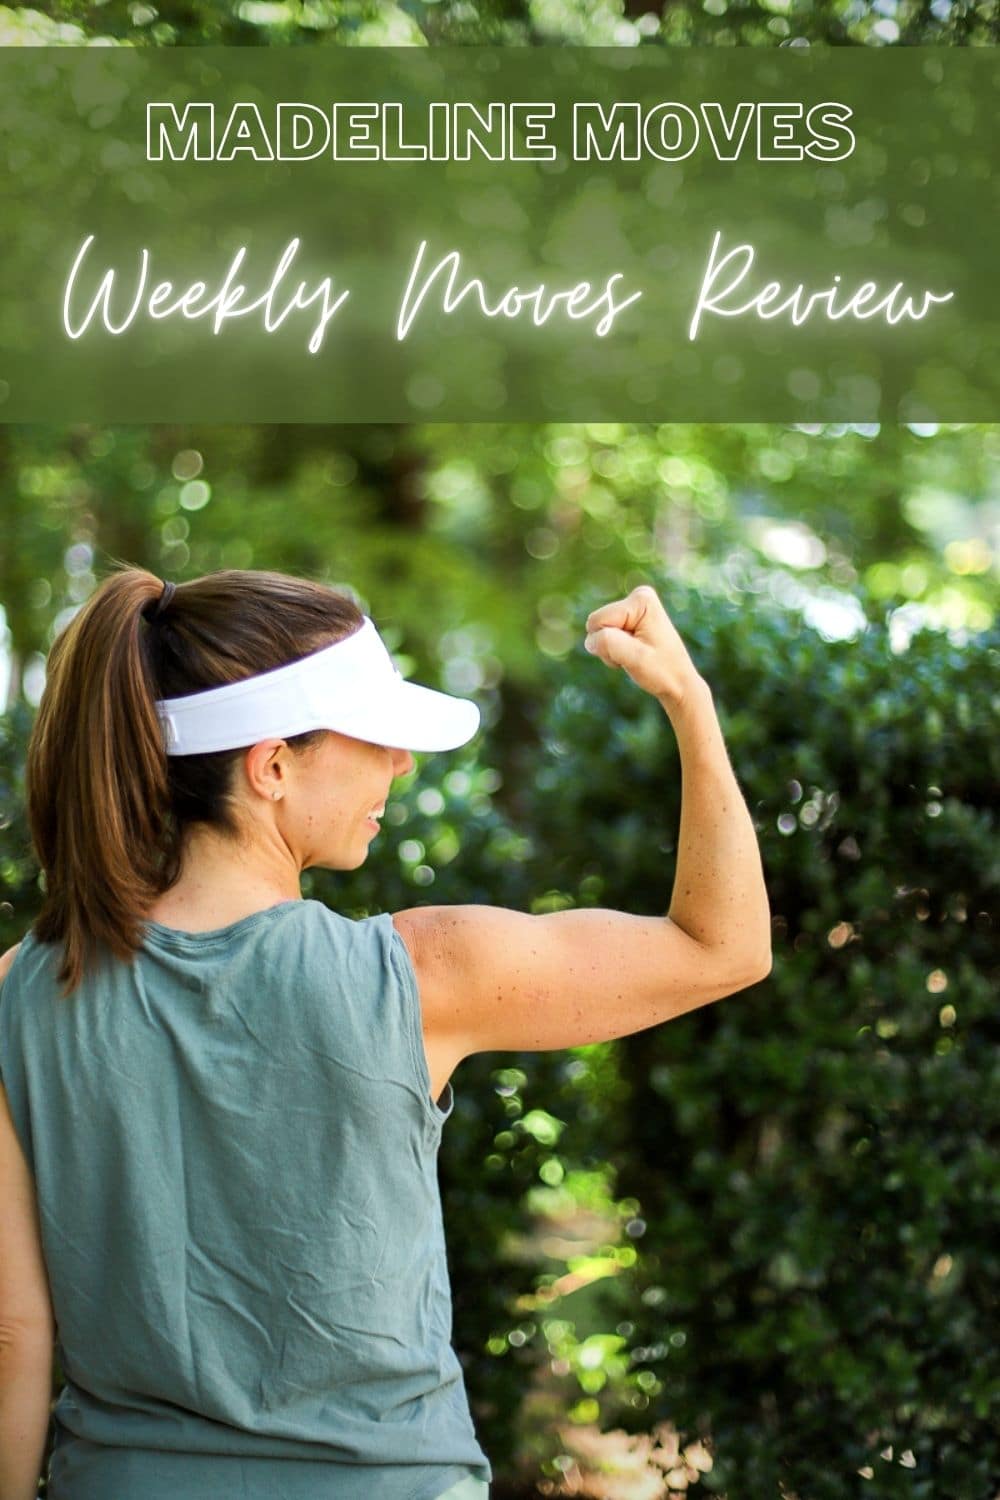 WEEKLY MOVES REVIEW